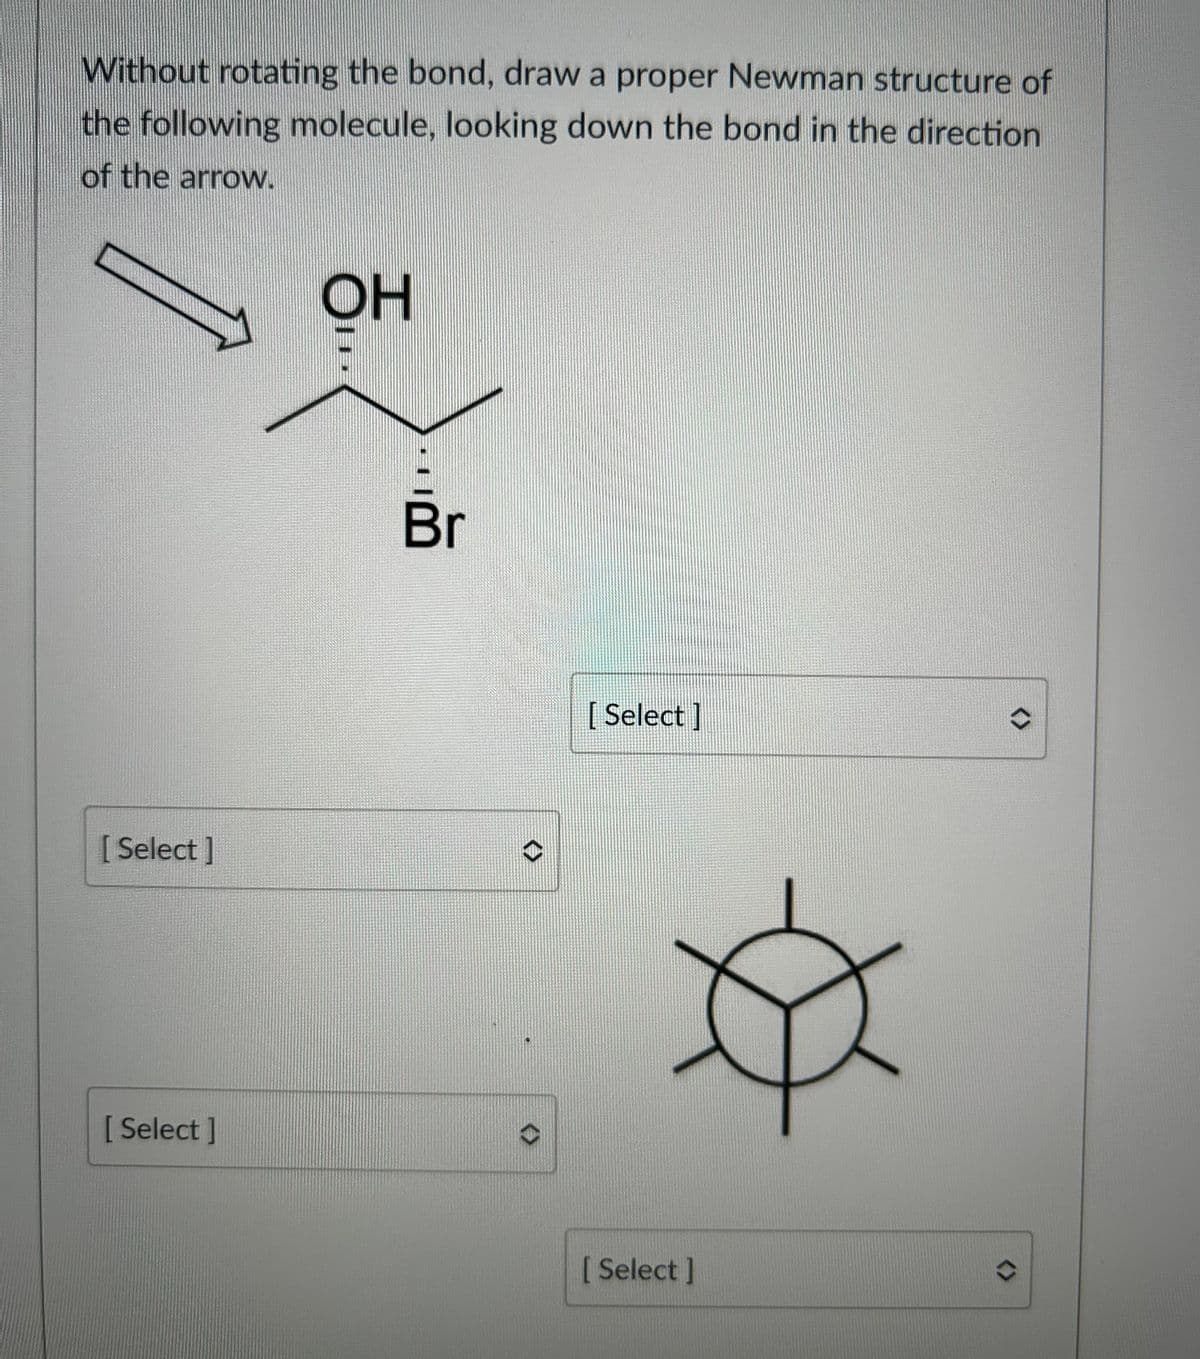 Without rotating the bond, draw a proper Newman structure of
the following molecule, looking down the bond in the direction
of the arrow.
[Select]
[Select]
OH
Br
<>
[Select]
[ Select ]
<>